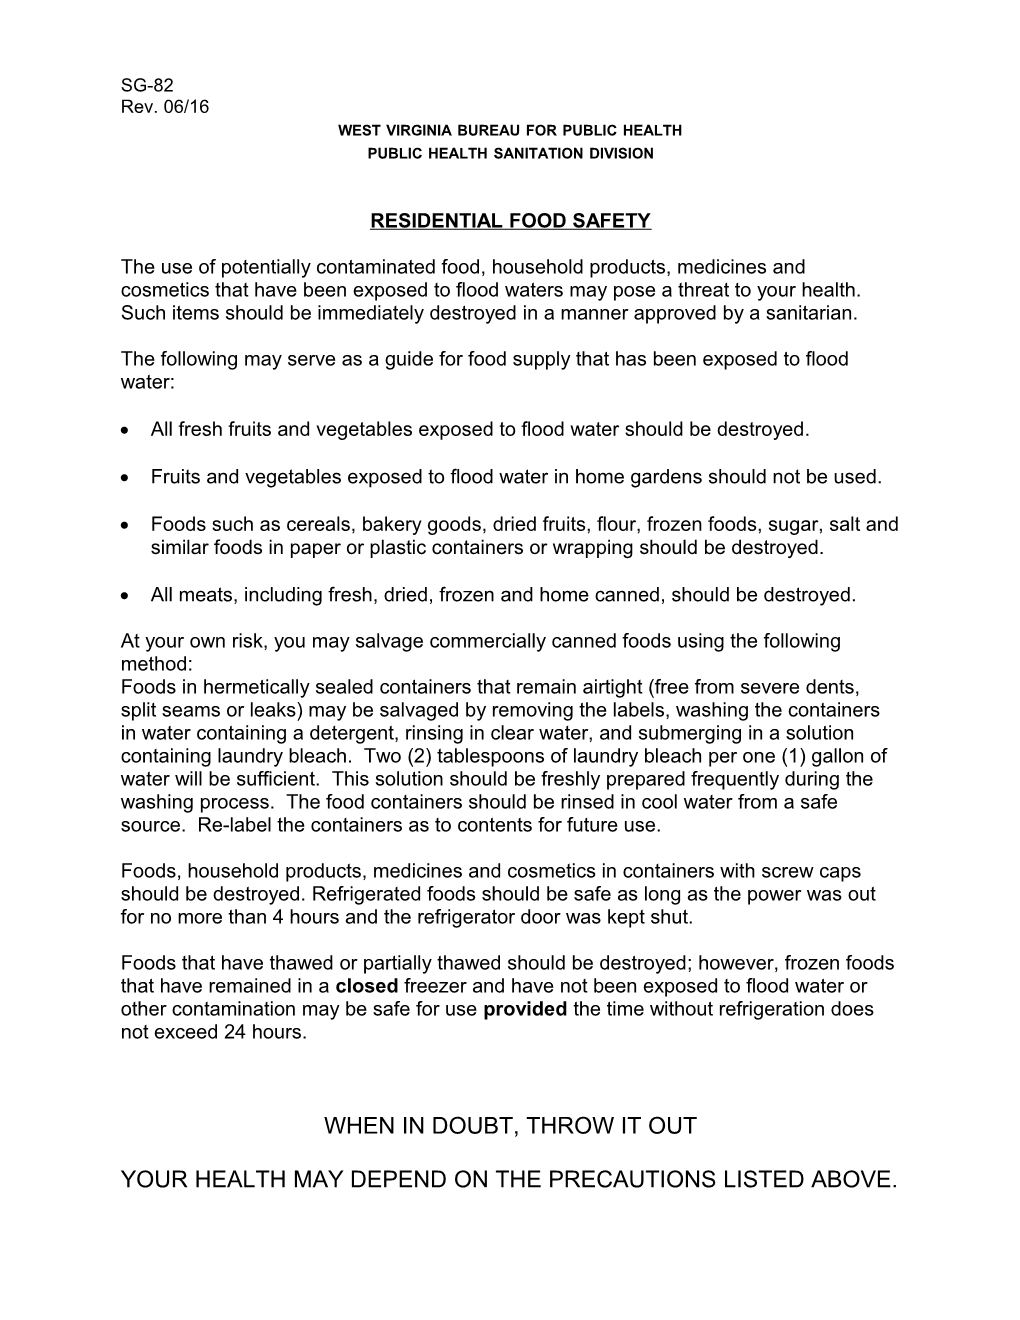 Residential Food Safety